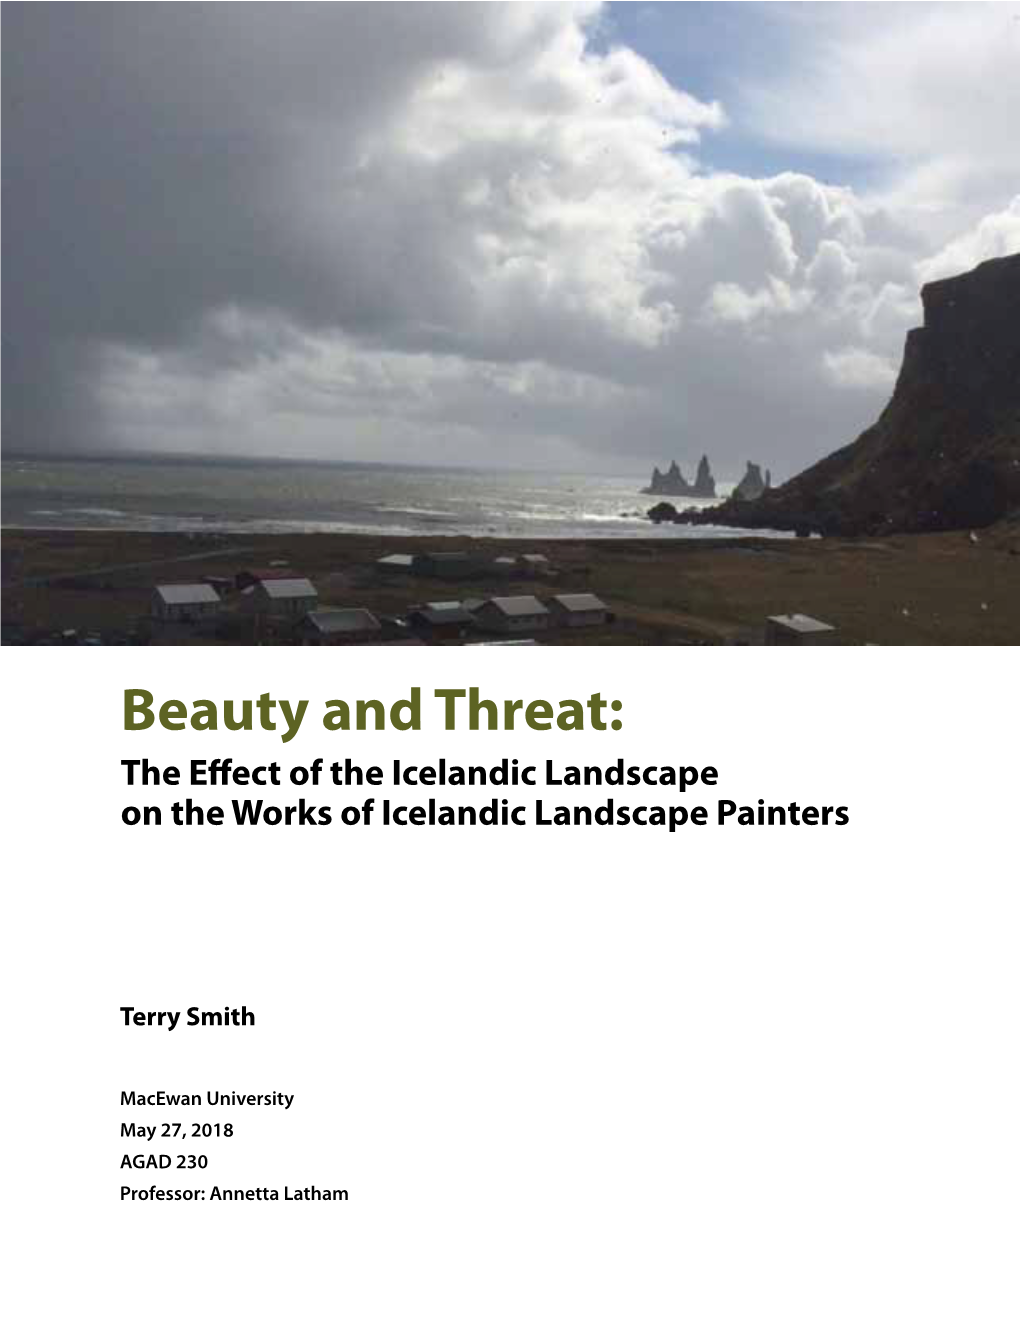 Beauty and Threat: the Effect of the Icelandic Landscape on the Works of Icelandic Landscape Painters